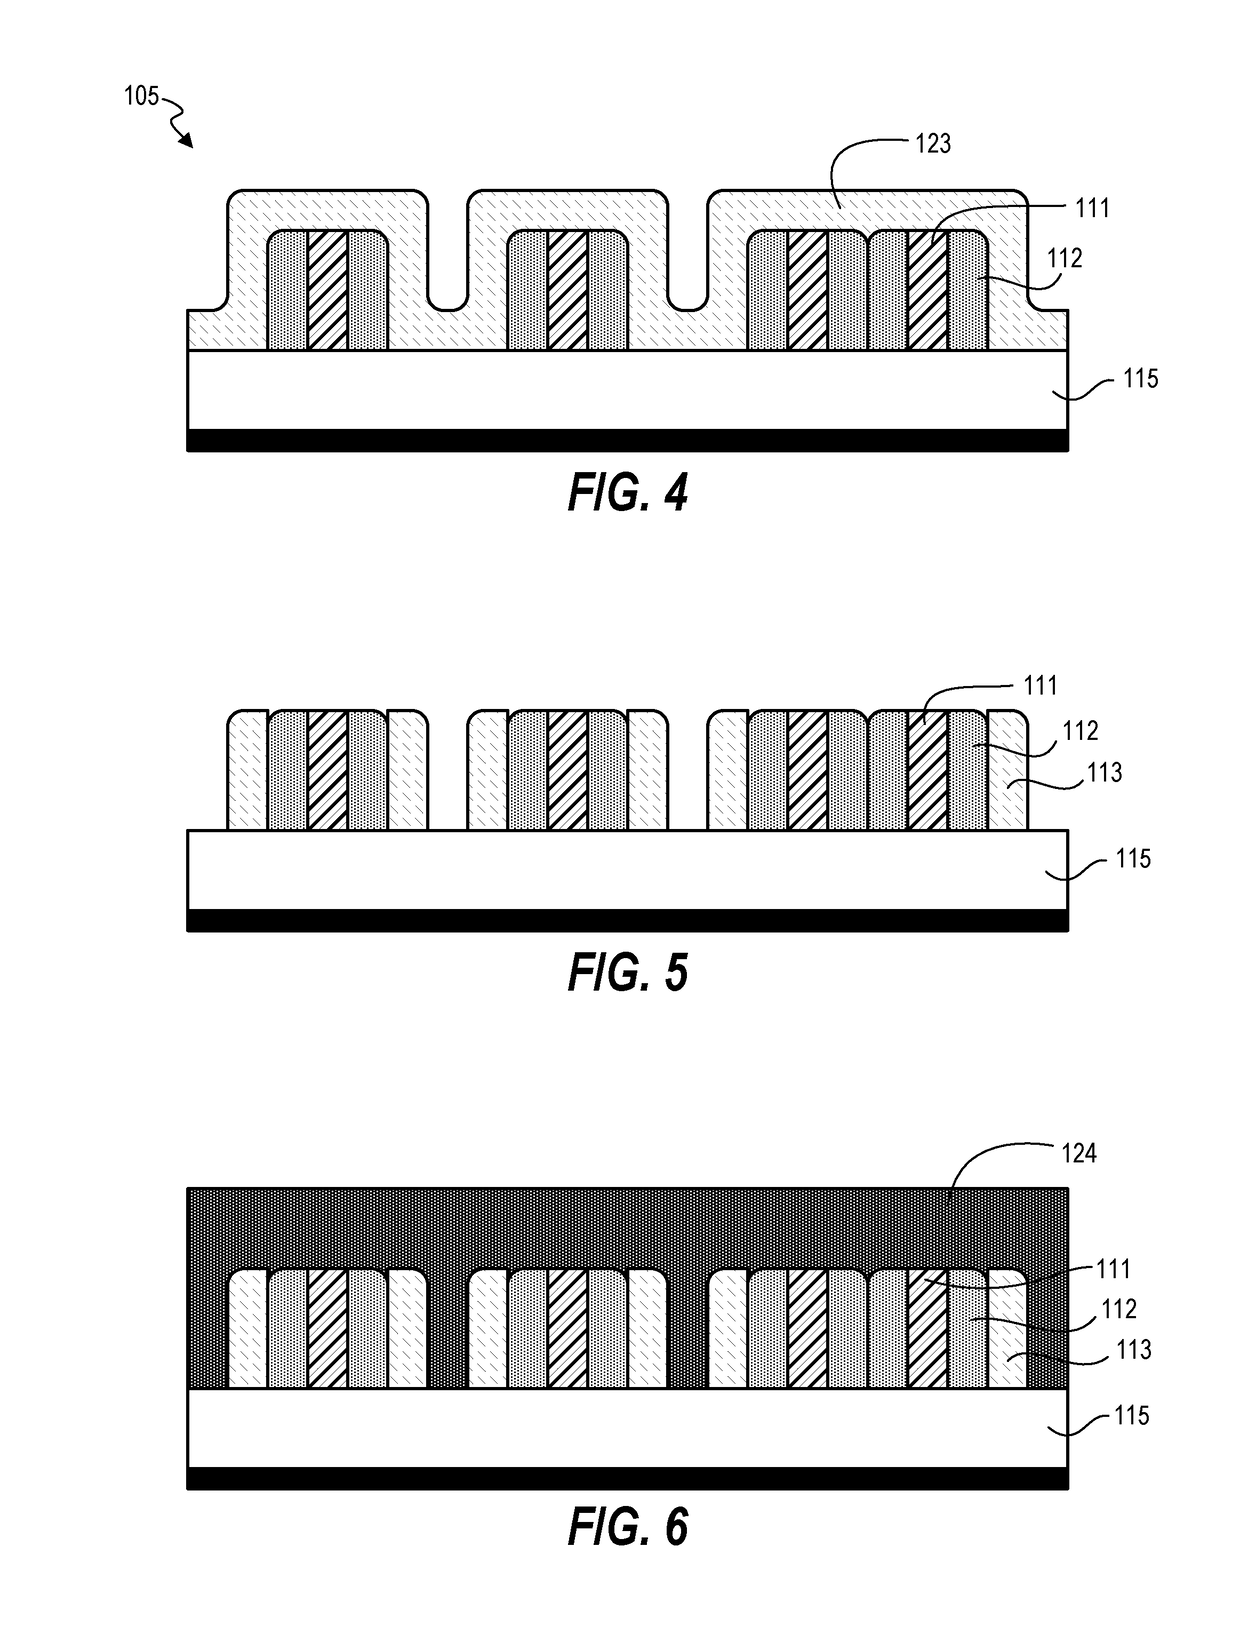 Methods of Forming Etch Masks for Sub-Resolution Substrate Patterning